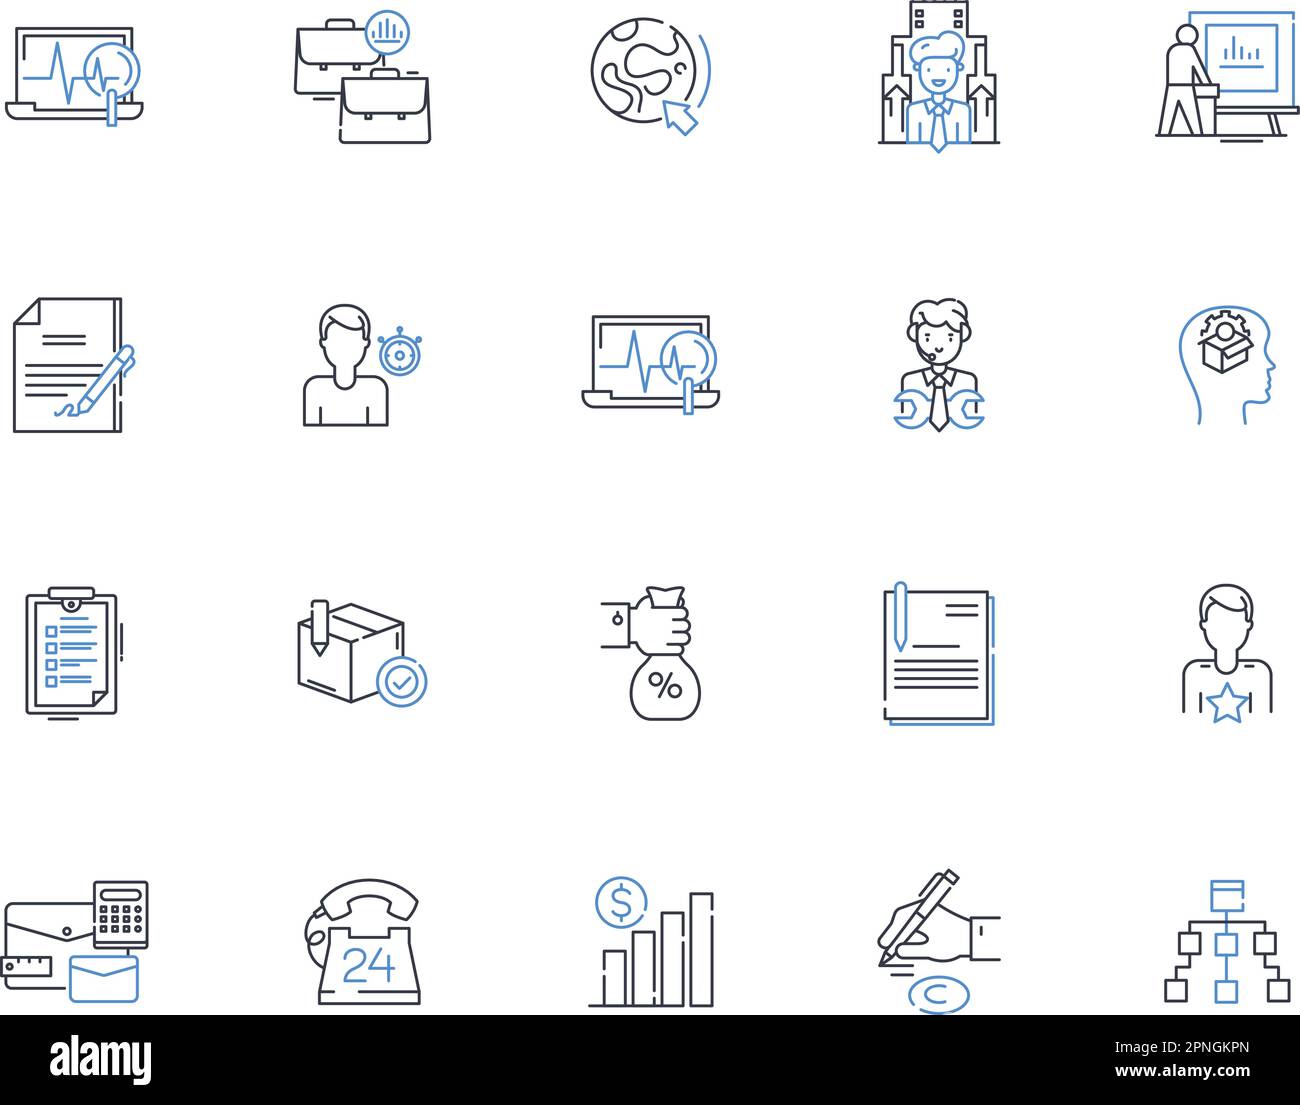 Number crunching line icons collection. Analysis, Math, Statistics, Algorithms, Spreadsheet, Modeling, Computation vector and linear illustration Stock Vector